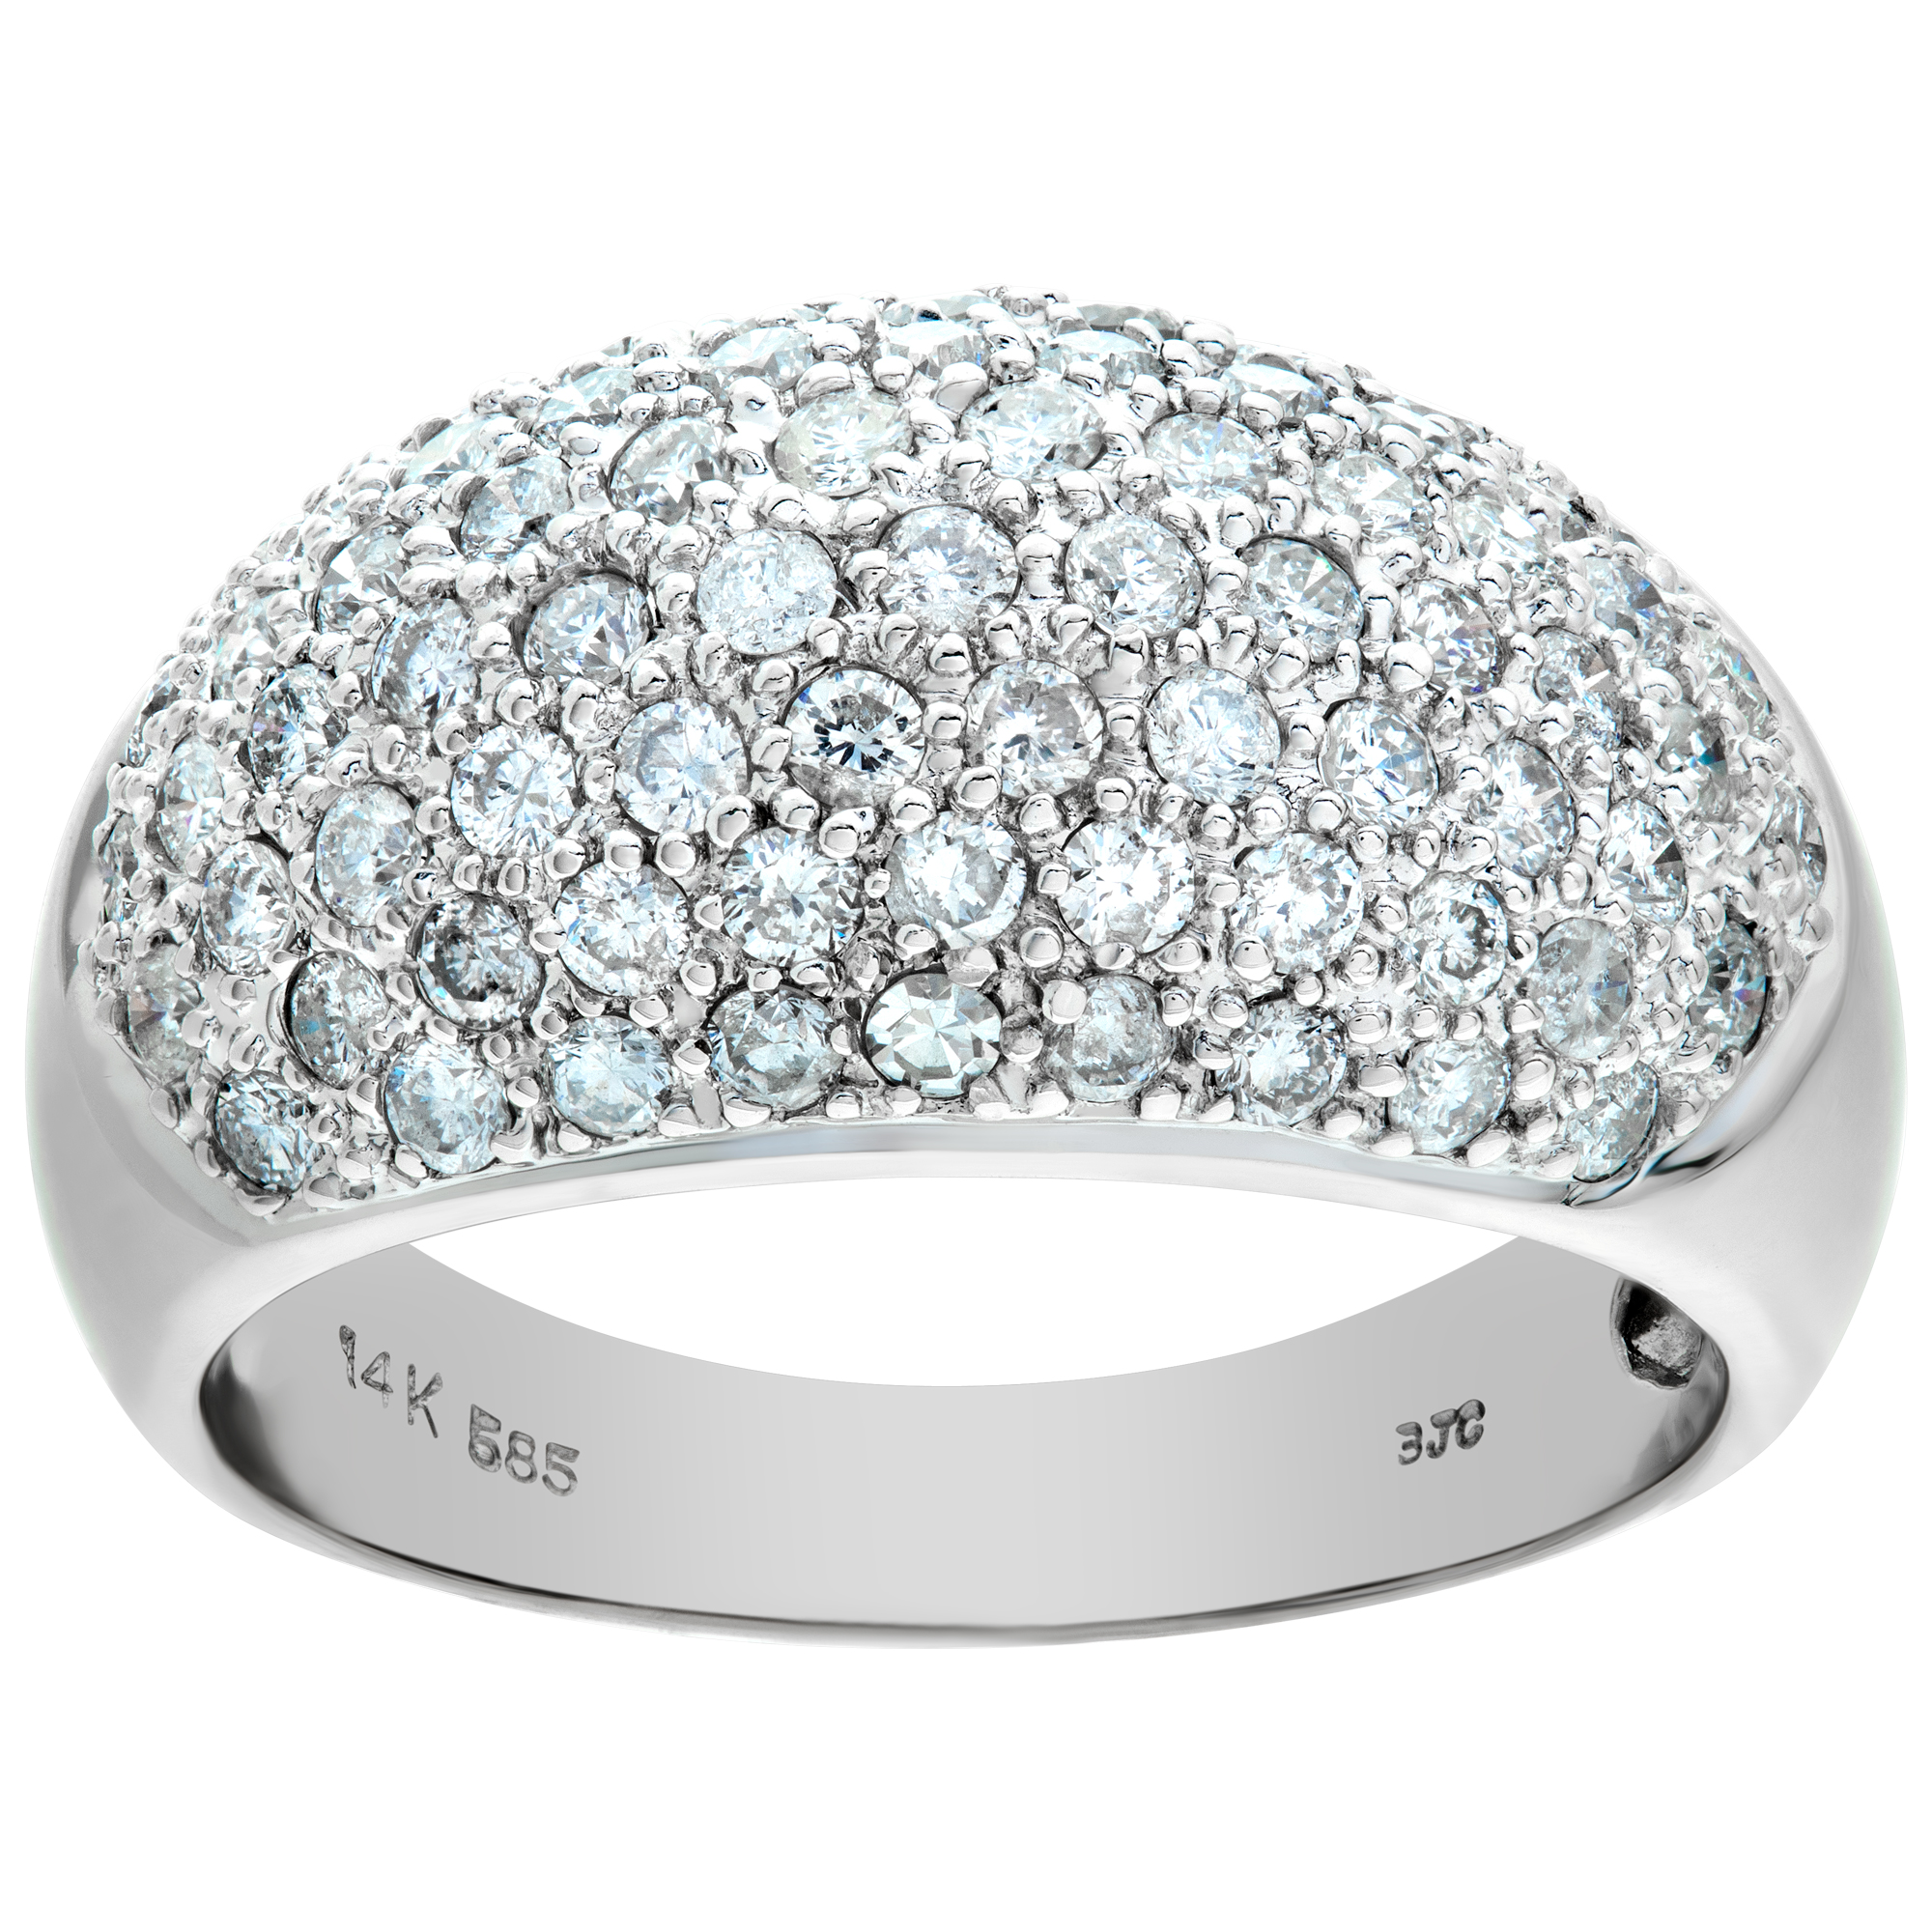 Domed Pave diamond ring in 14k white gold. 3.0 cts in pave diamonds.(G-H, SI2) image 1